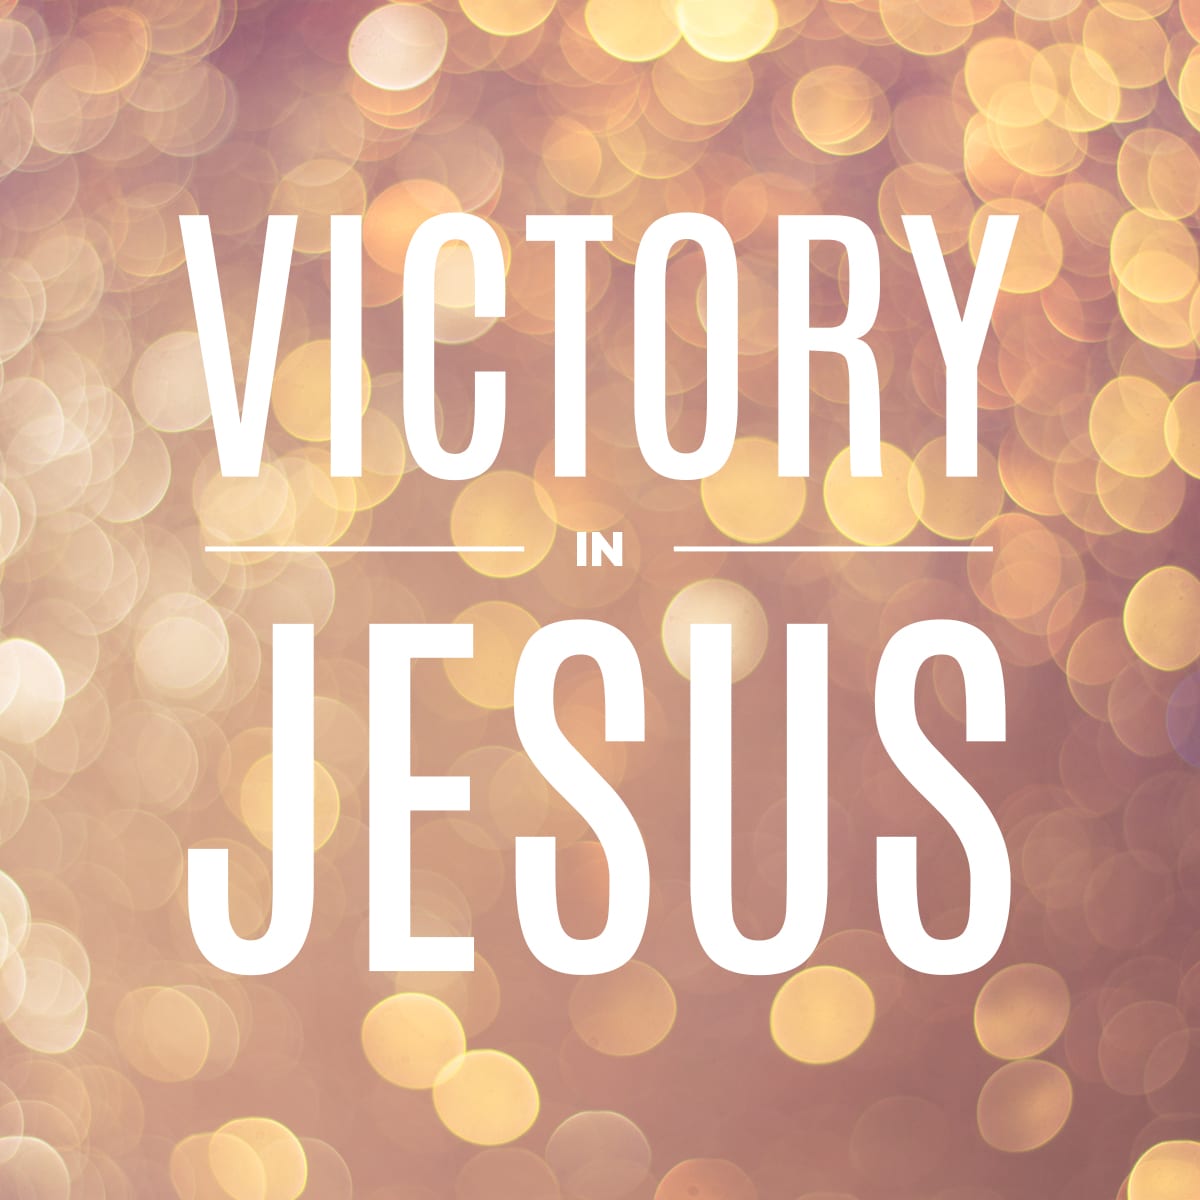 The Victories of Easter